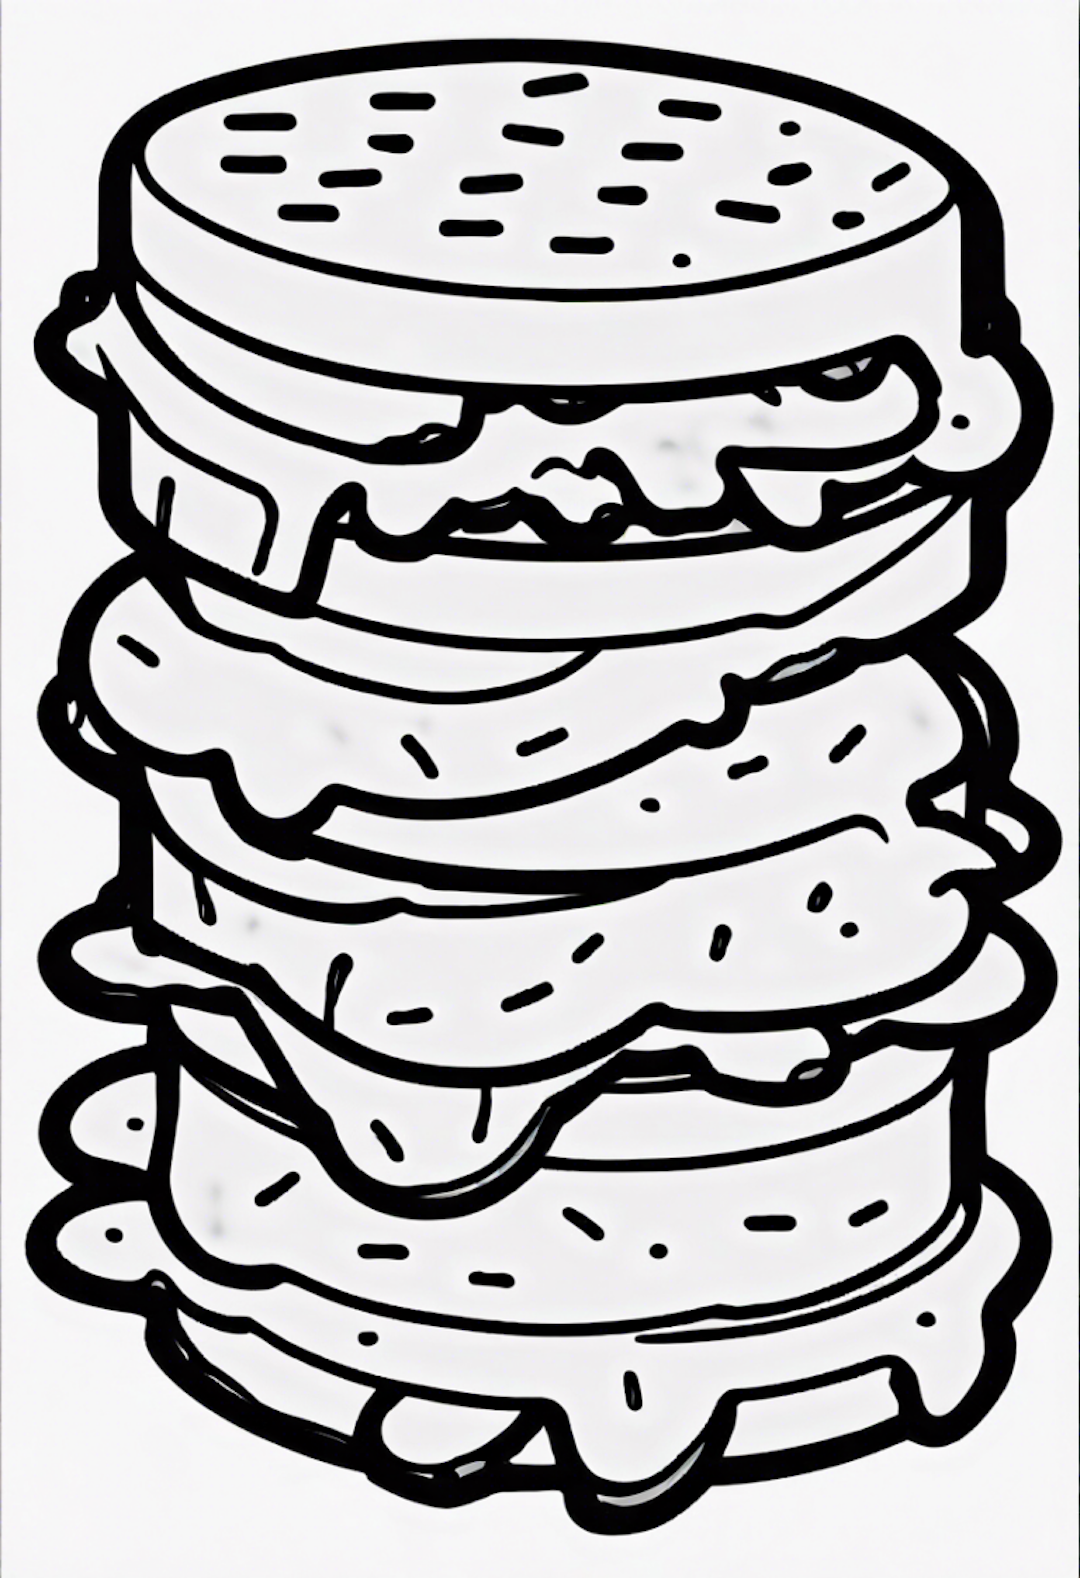 Intricate Ice Cream Sandwich coloring pages